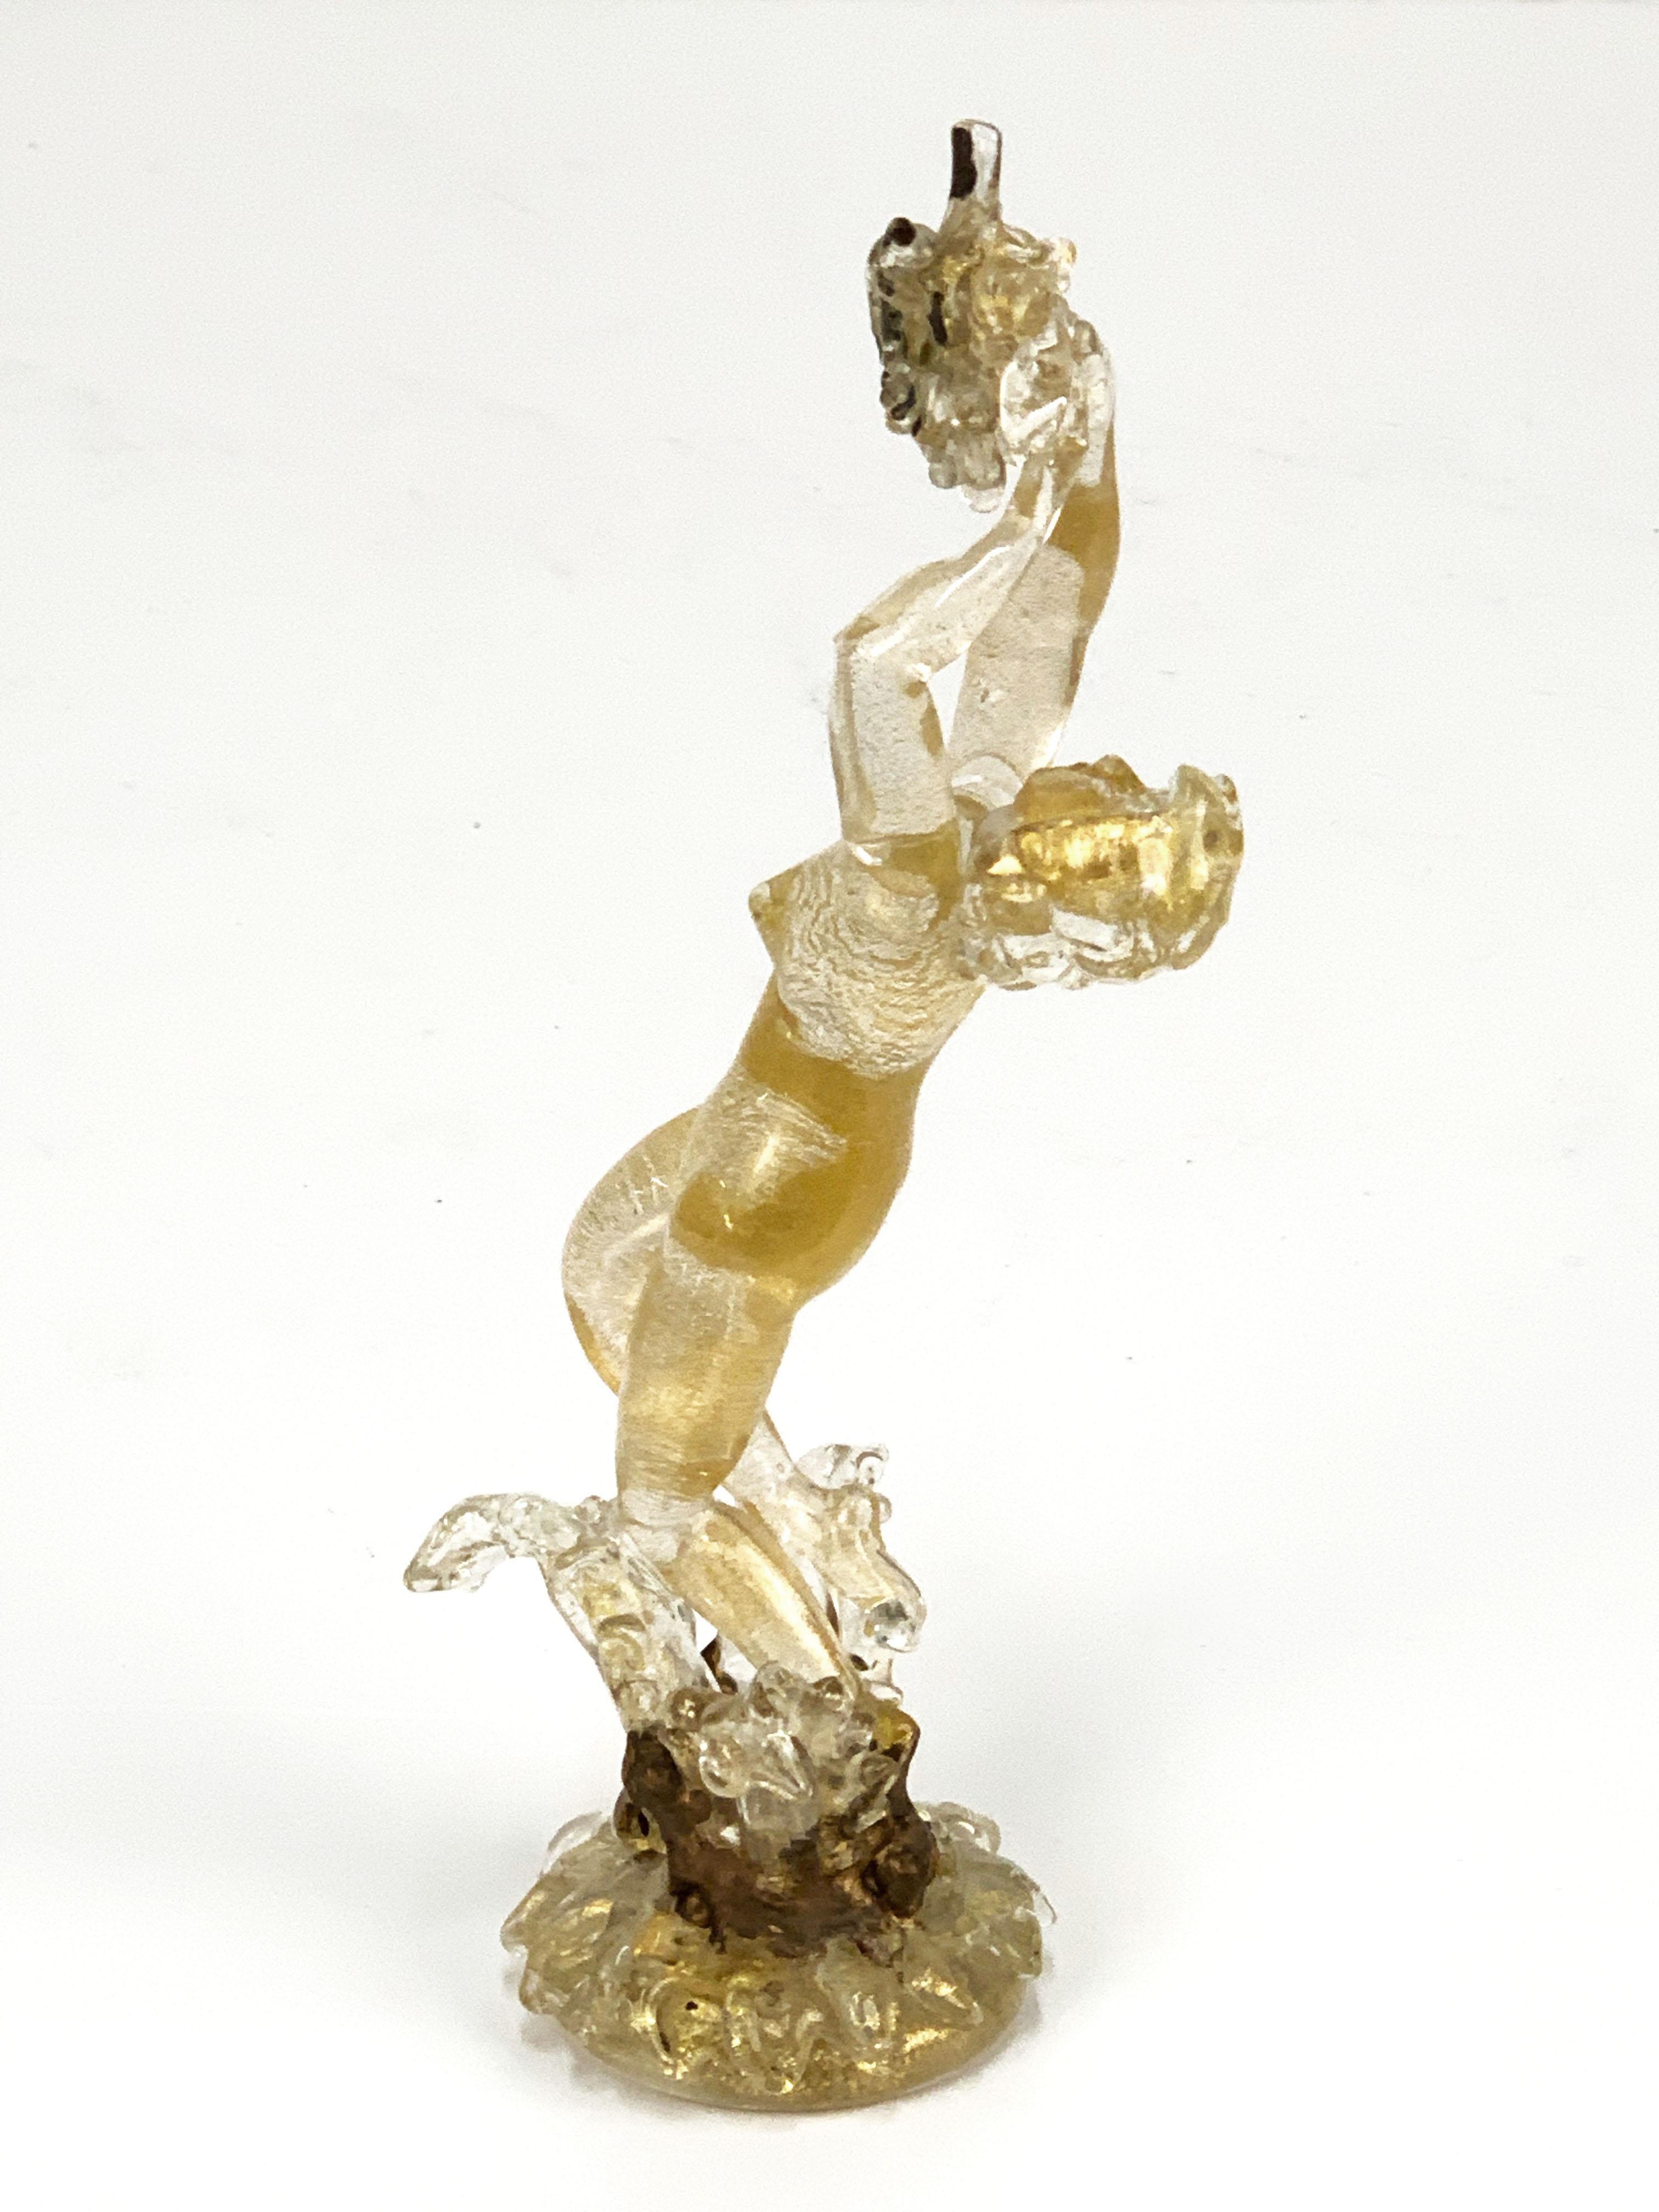 20th Century Midcentury Female Murano Glass and Gold Statue Attributed to Ercole Barovier